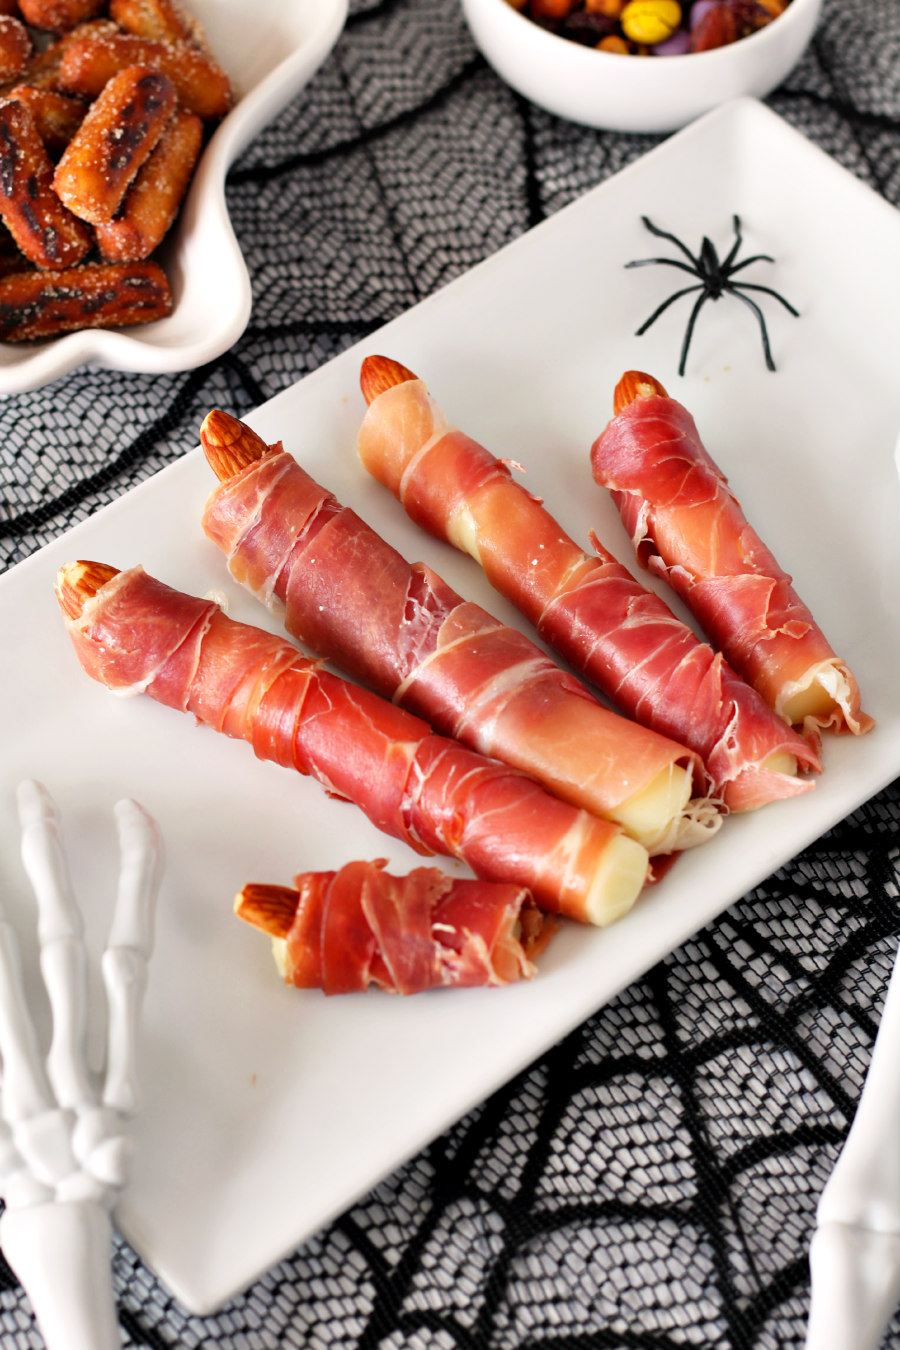 Prosciutto Wrapped Mozzarella Fingers on a serrving plate with plastic spiders, skeleton hands, and small bowls of snacks in background.